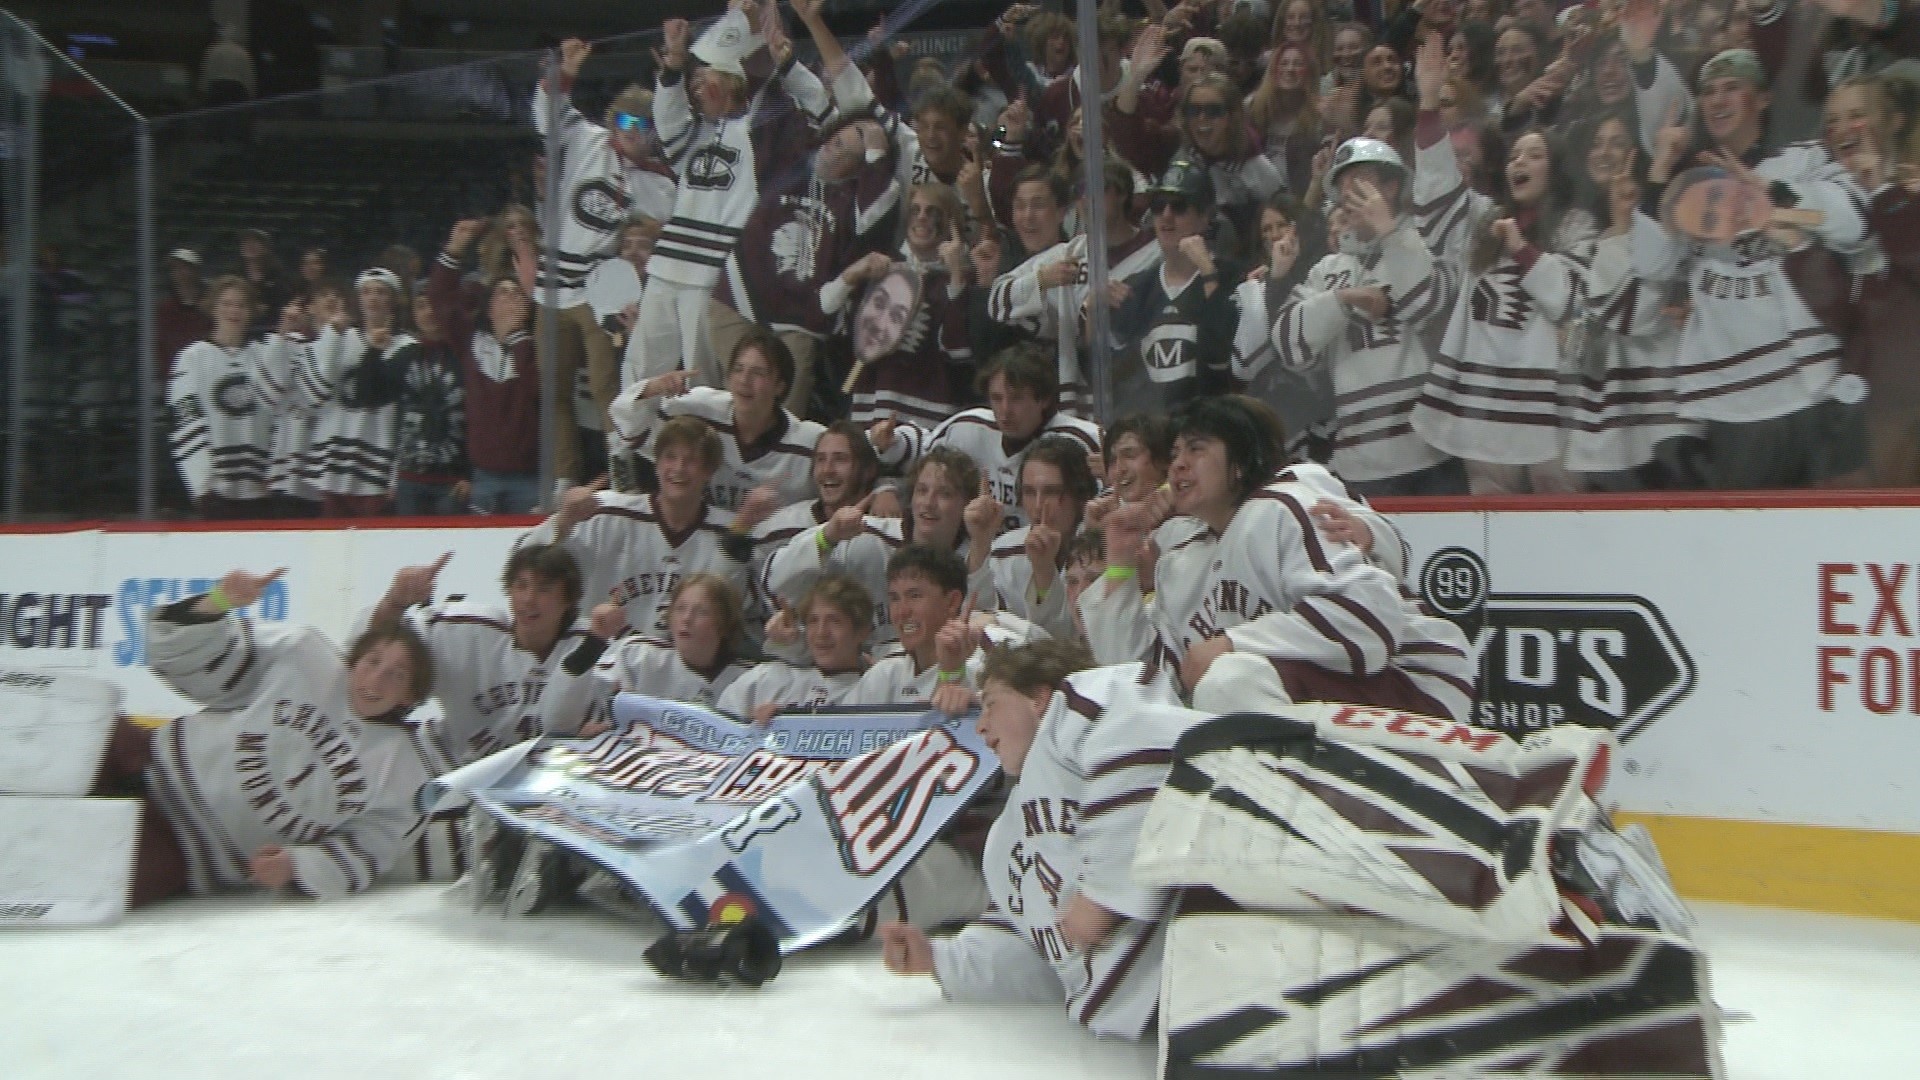 The Red-Tailed Hawks won the Class 4A hockey championship for the first time since 2004 on Tuesday night.